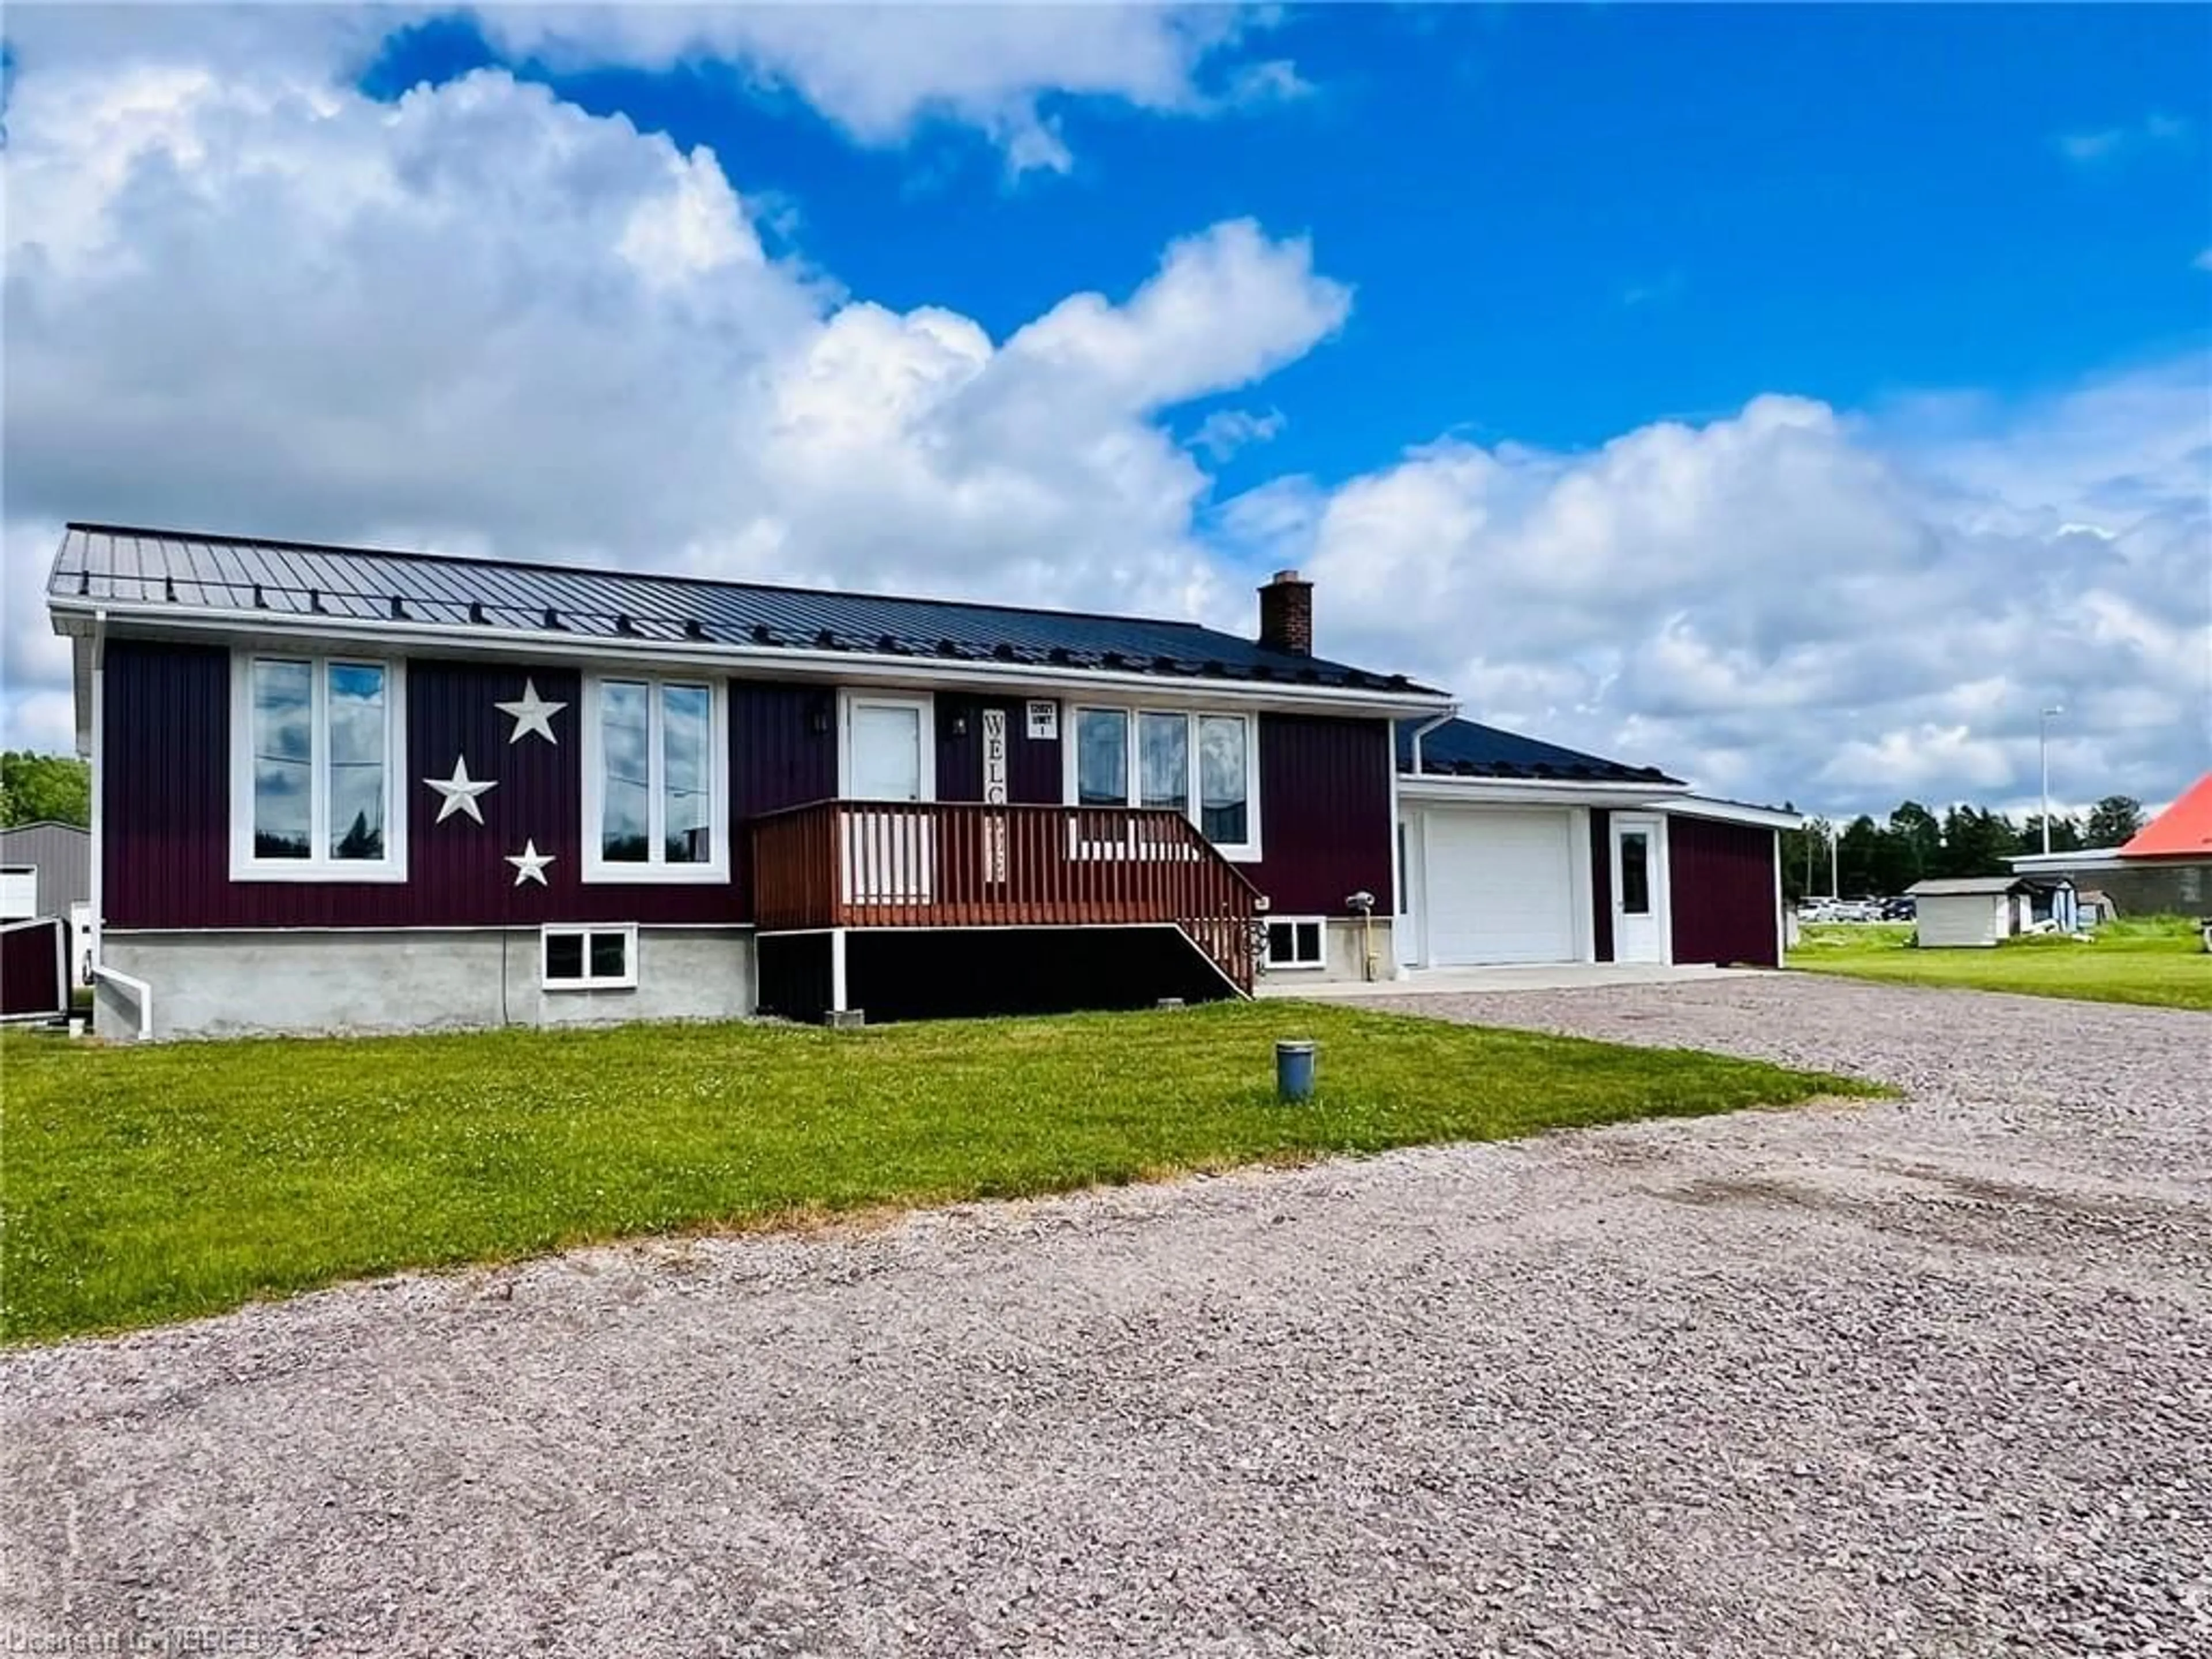 Frontside or backside of a home for 12021 Highway 17, Sturgeon Falls Ontario P2B 2S7